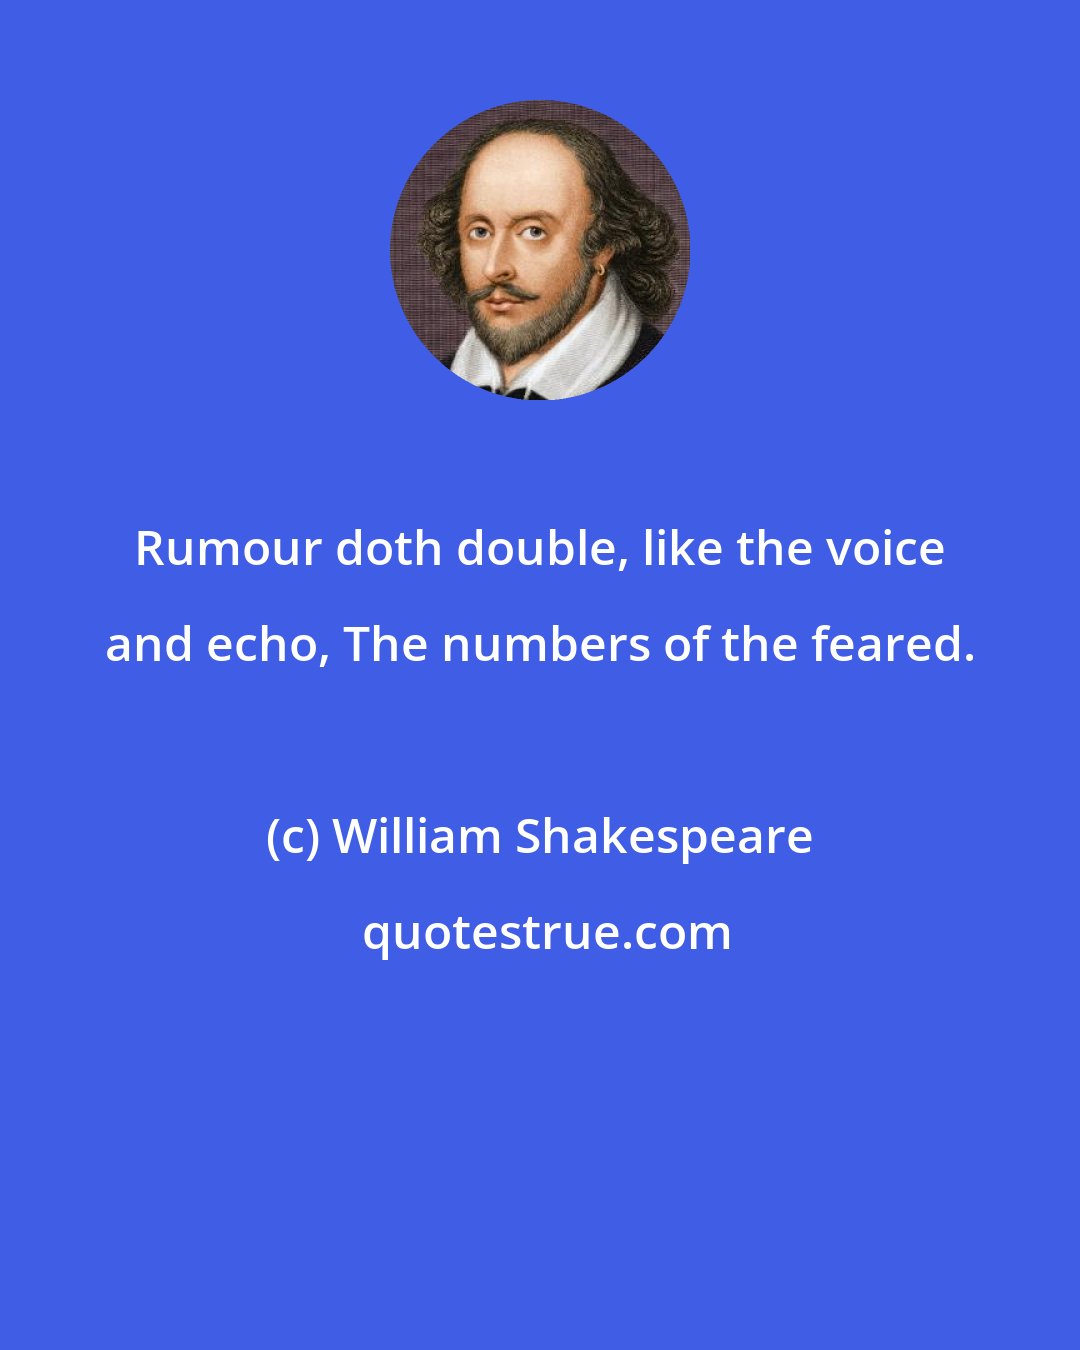 William Shakespeare: Rumour doth double, like the voice and echo, The numbers of the feared.